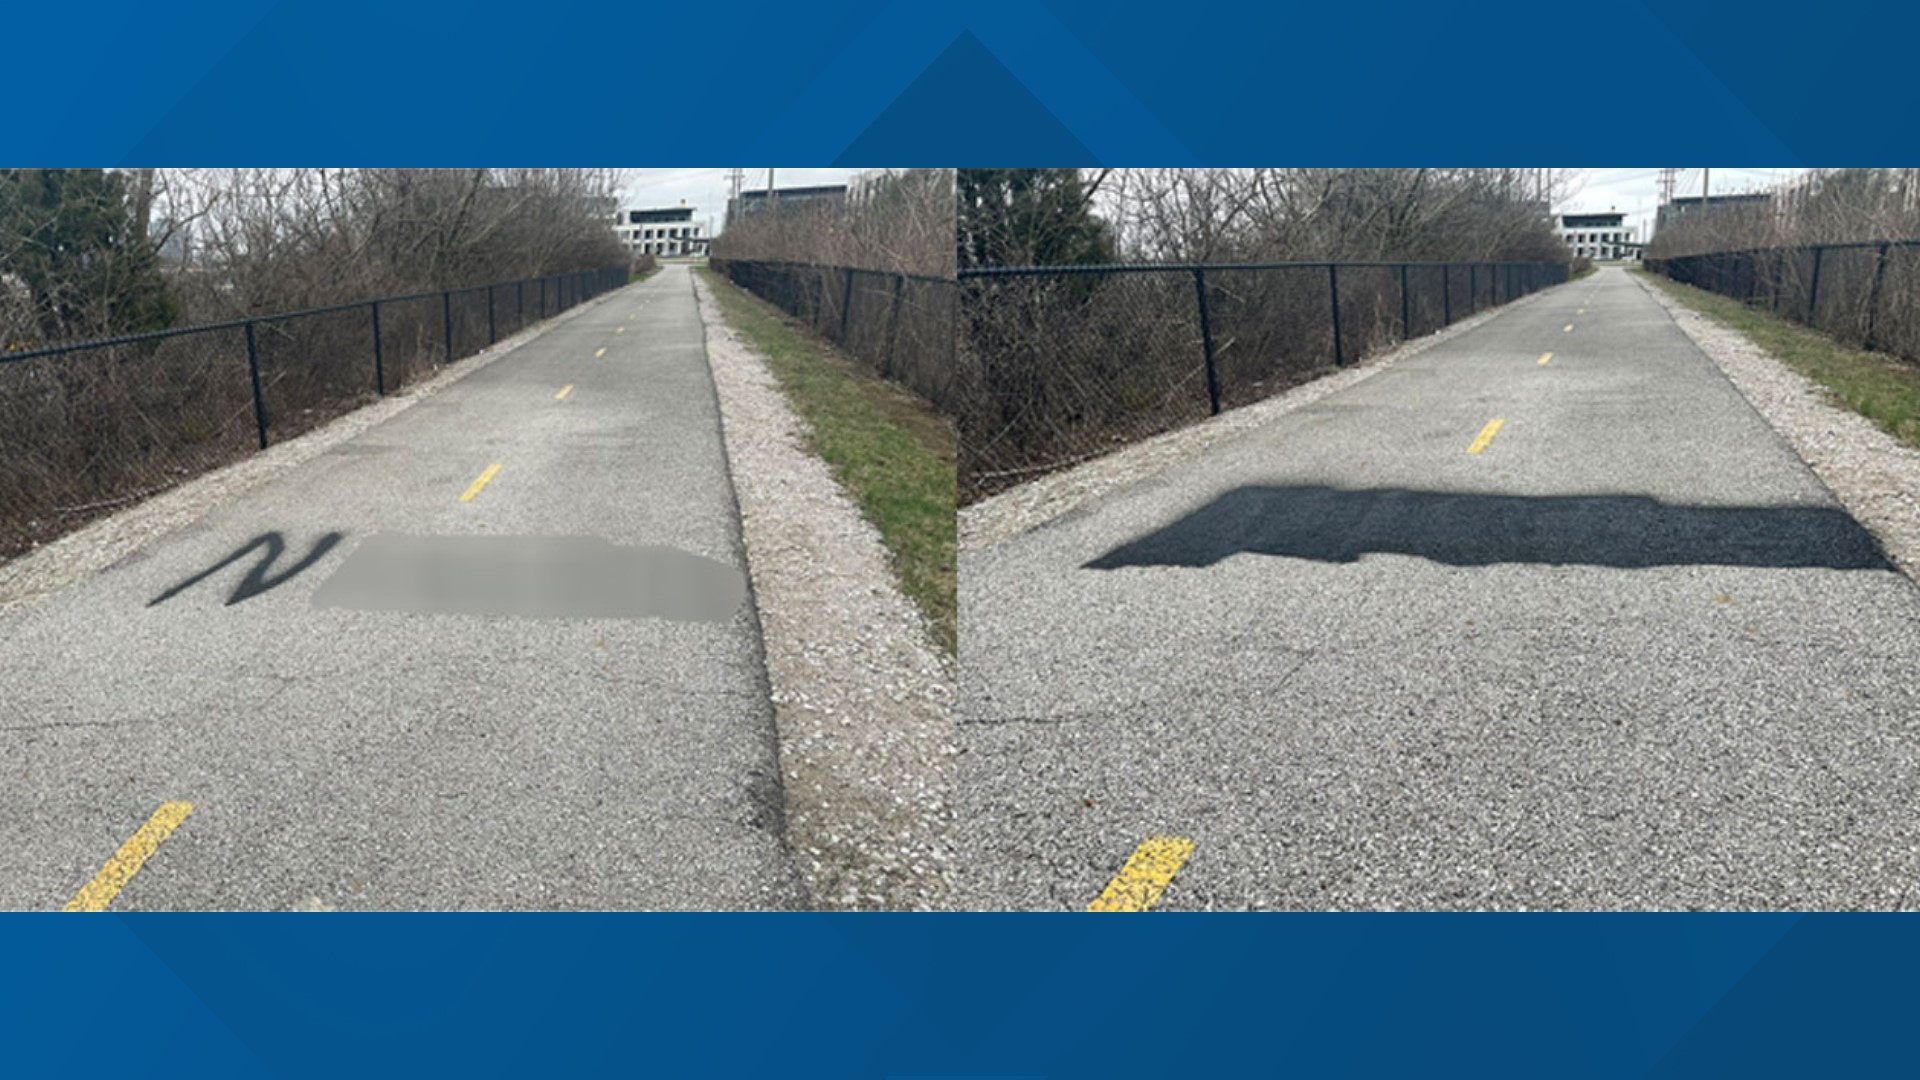 Morgan Hughes said he spotted the racial slur spray-painted on the Olentangy Trail Monday morning.